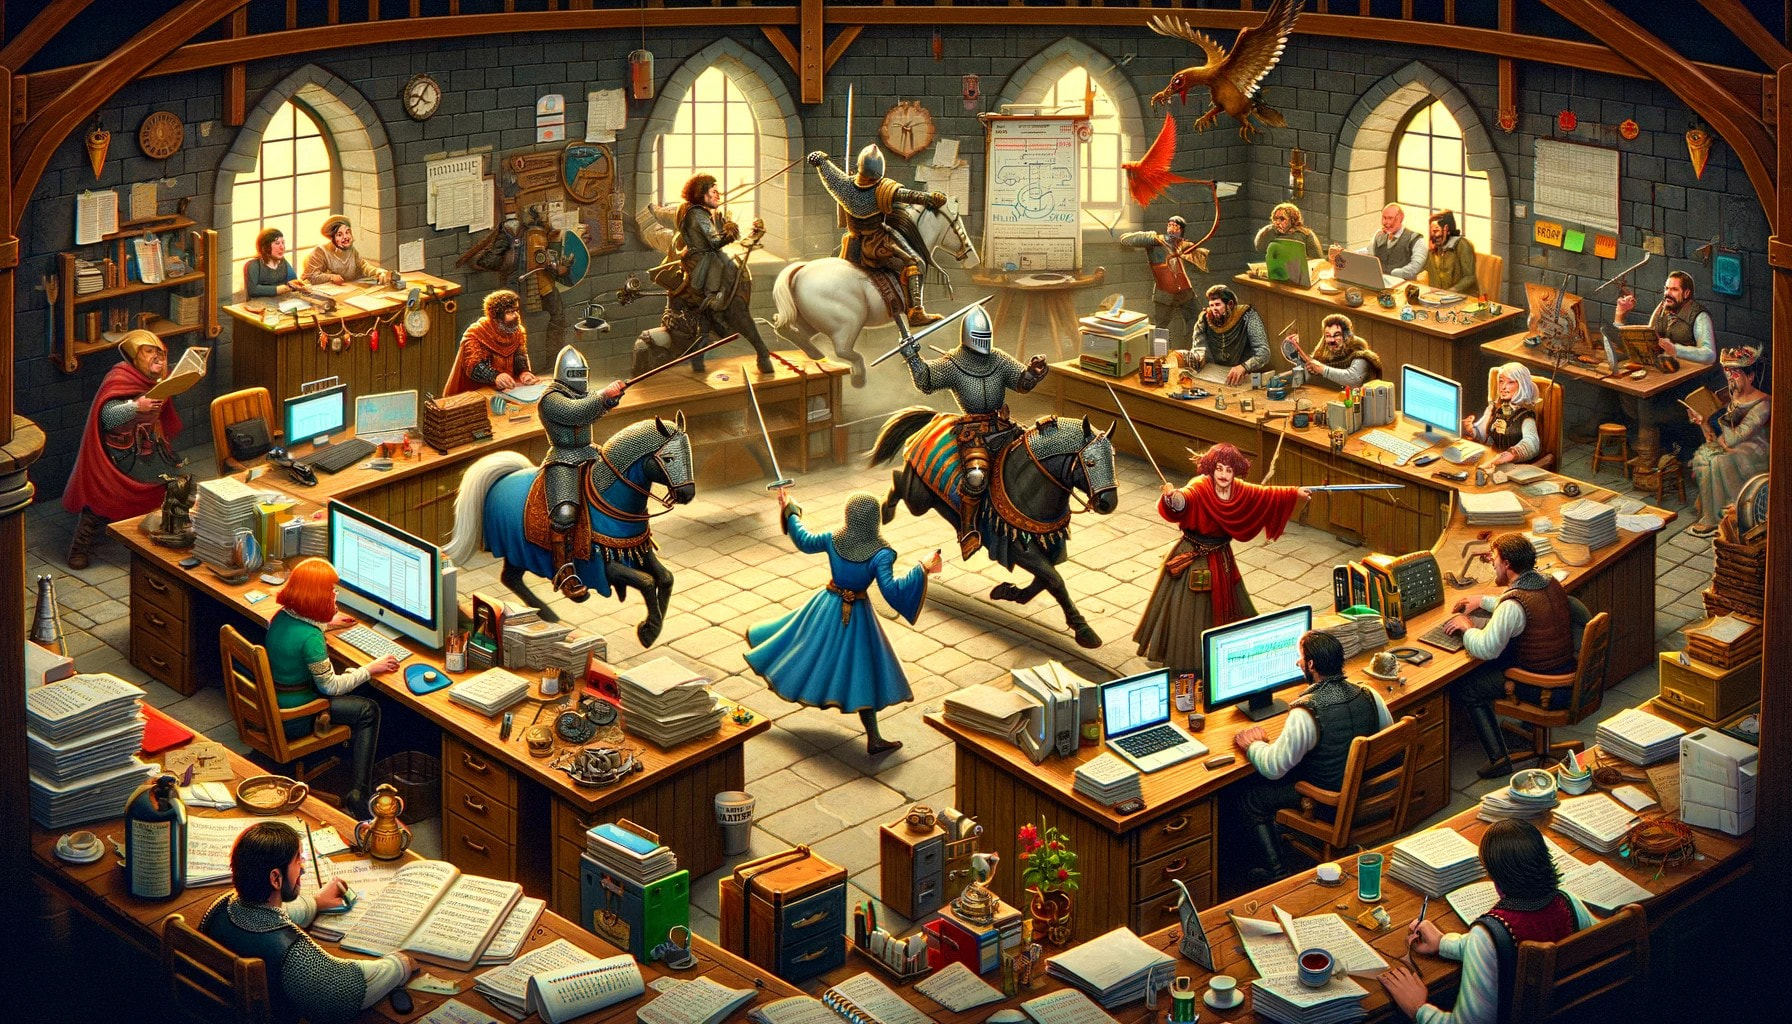 A medieval battle in an office.